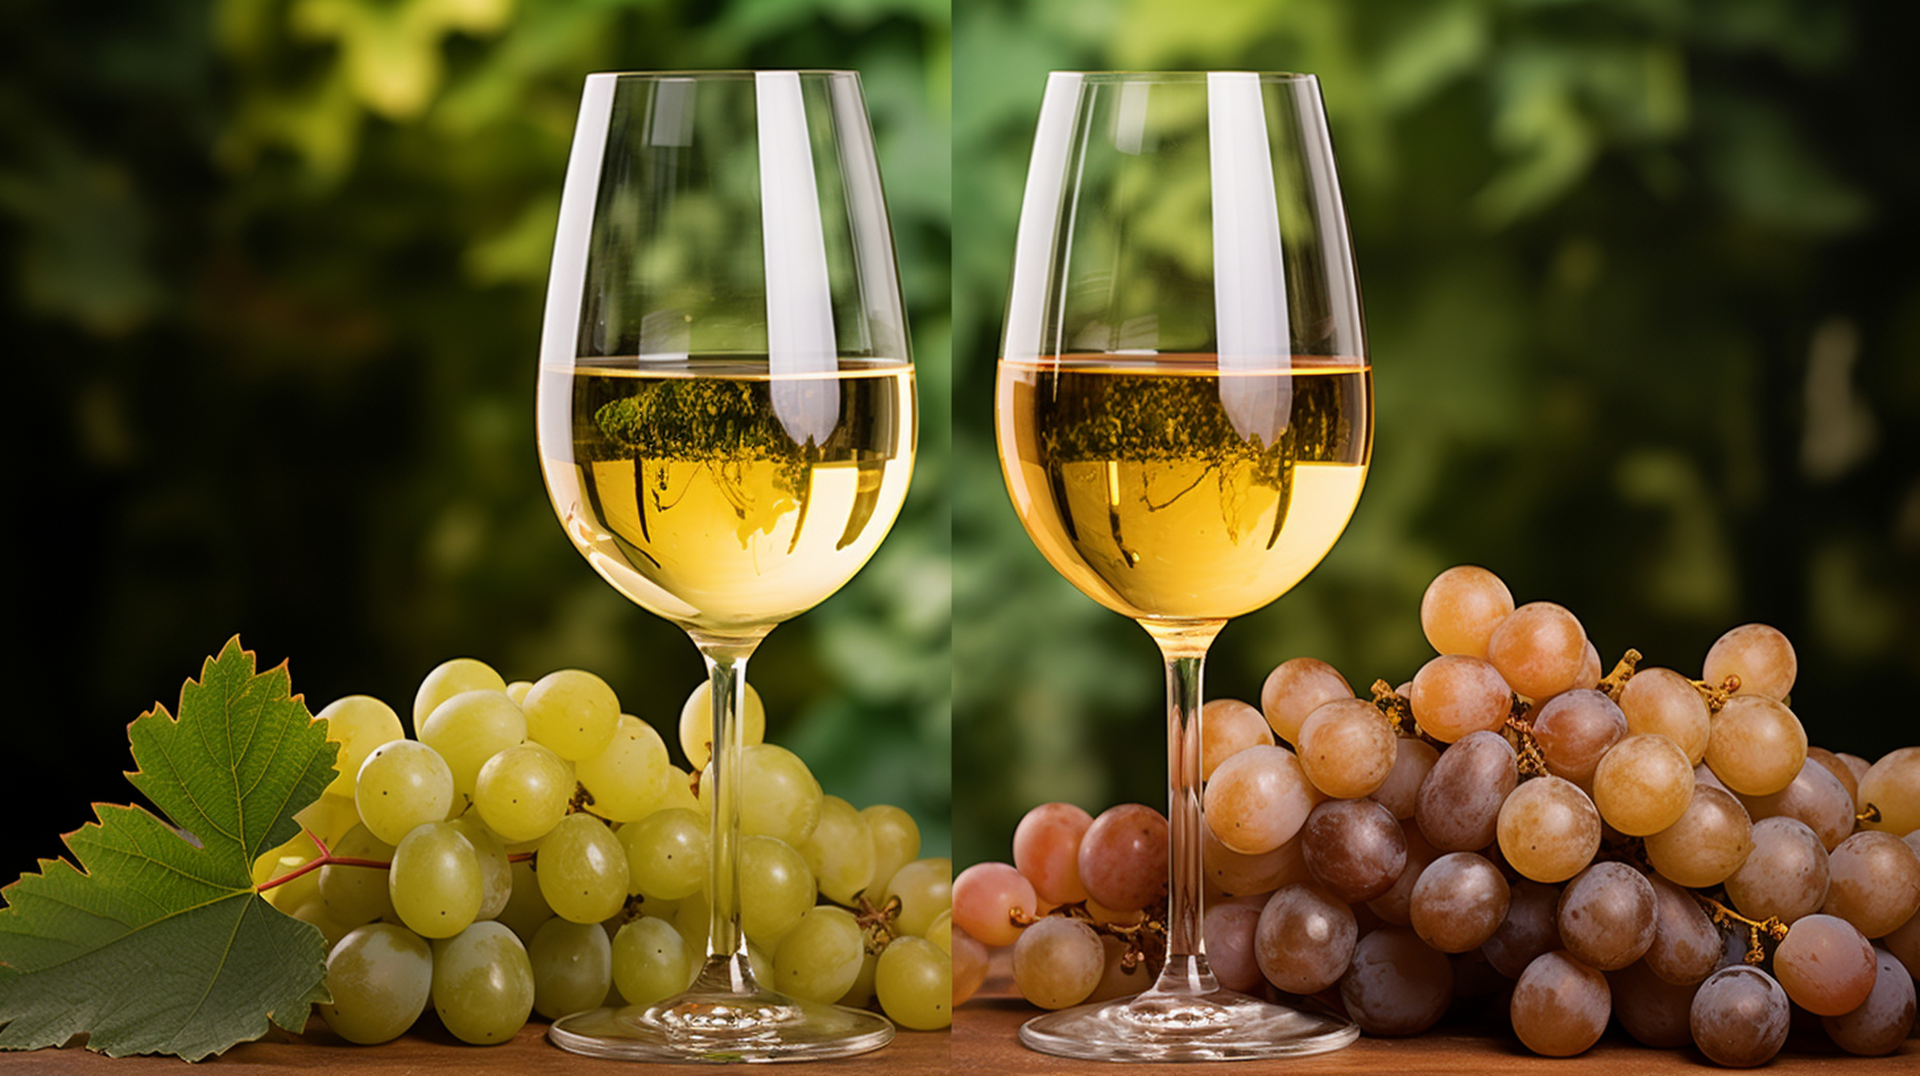  a split image comparing a golden Chardonnay in a wine glass and a paler Pinot Blanc, surrounded by their respective grapes and vine leaves to highlight the difference.